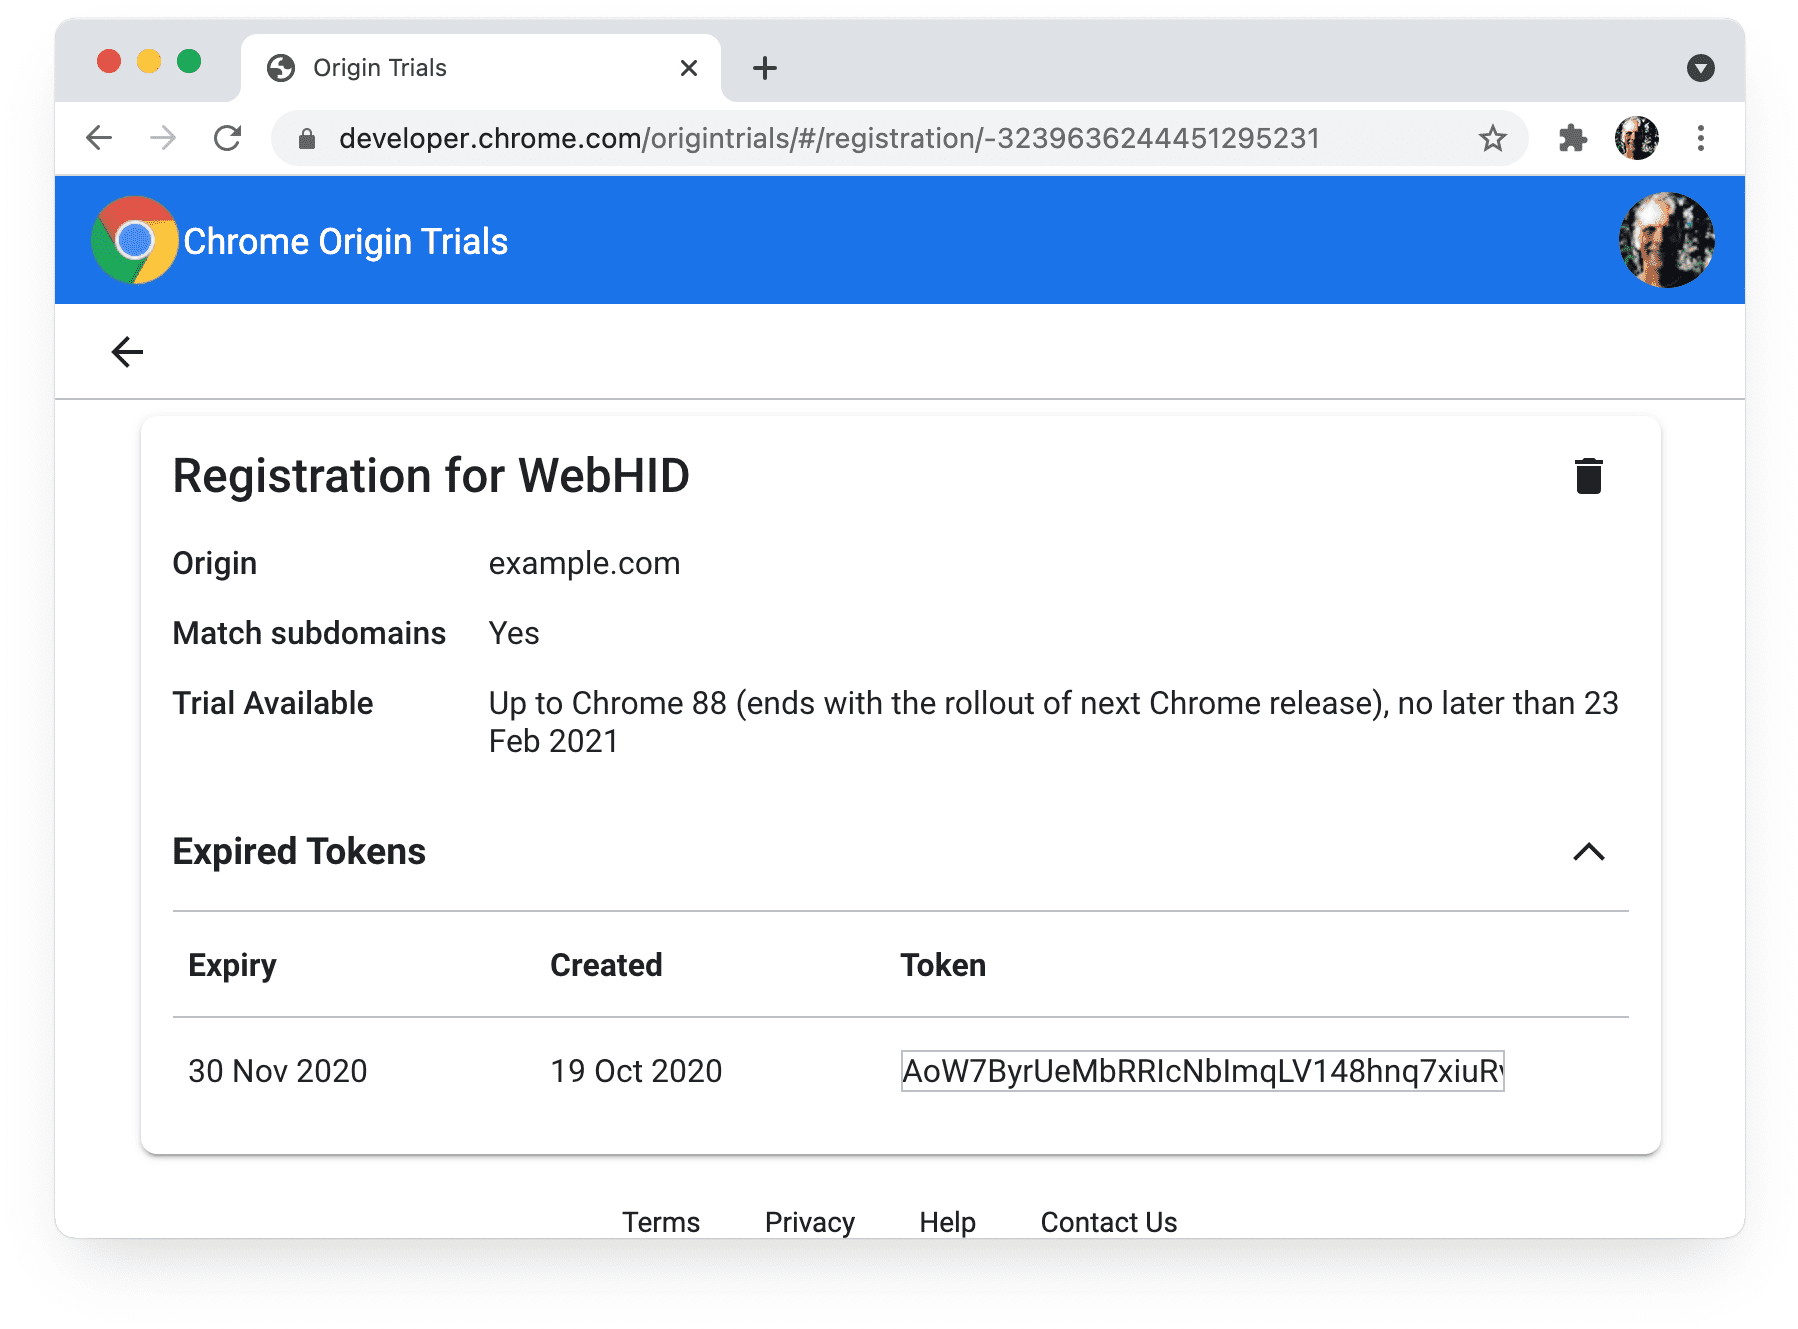 Chrome origin trials 
My Registrations page showing expired tokens.